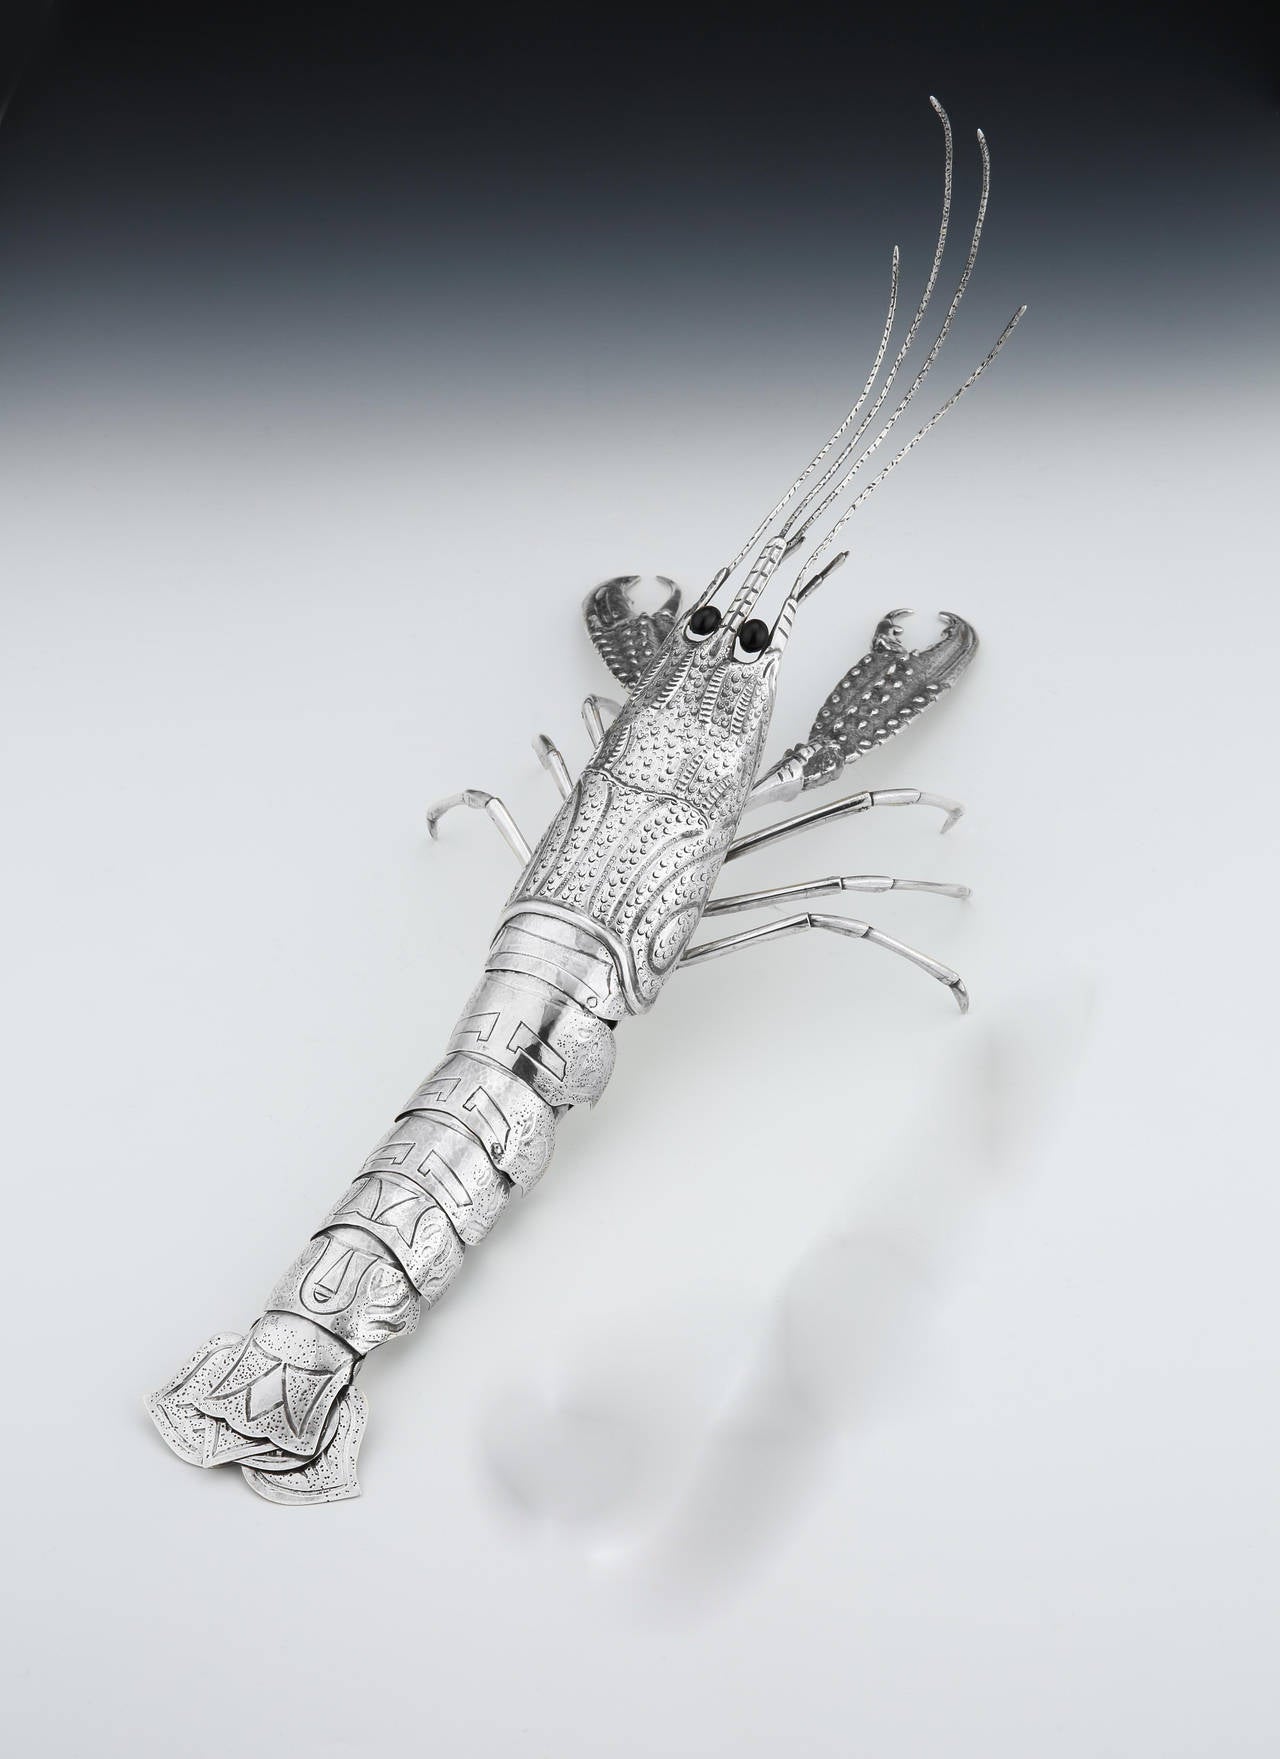 Armando da Silva Ferreira of Oporto, Portugal: a beautifully made silver centrepiece in the form of a lobster, with fully articulated pincers and legs, and onyx-black glass eyes and fanned tail. Although stylized in form, the lifelike movement has